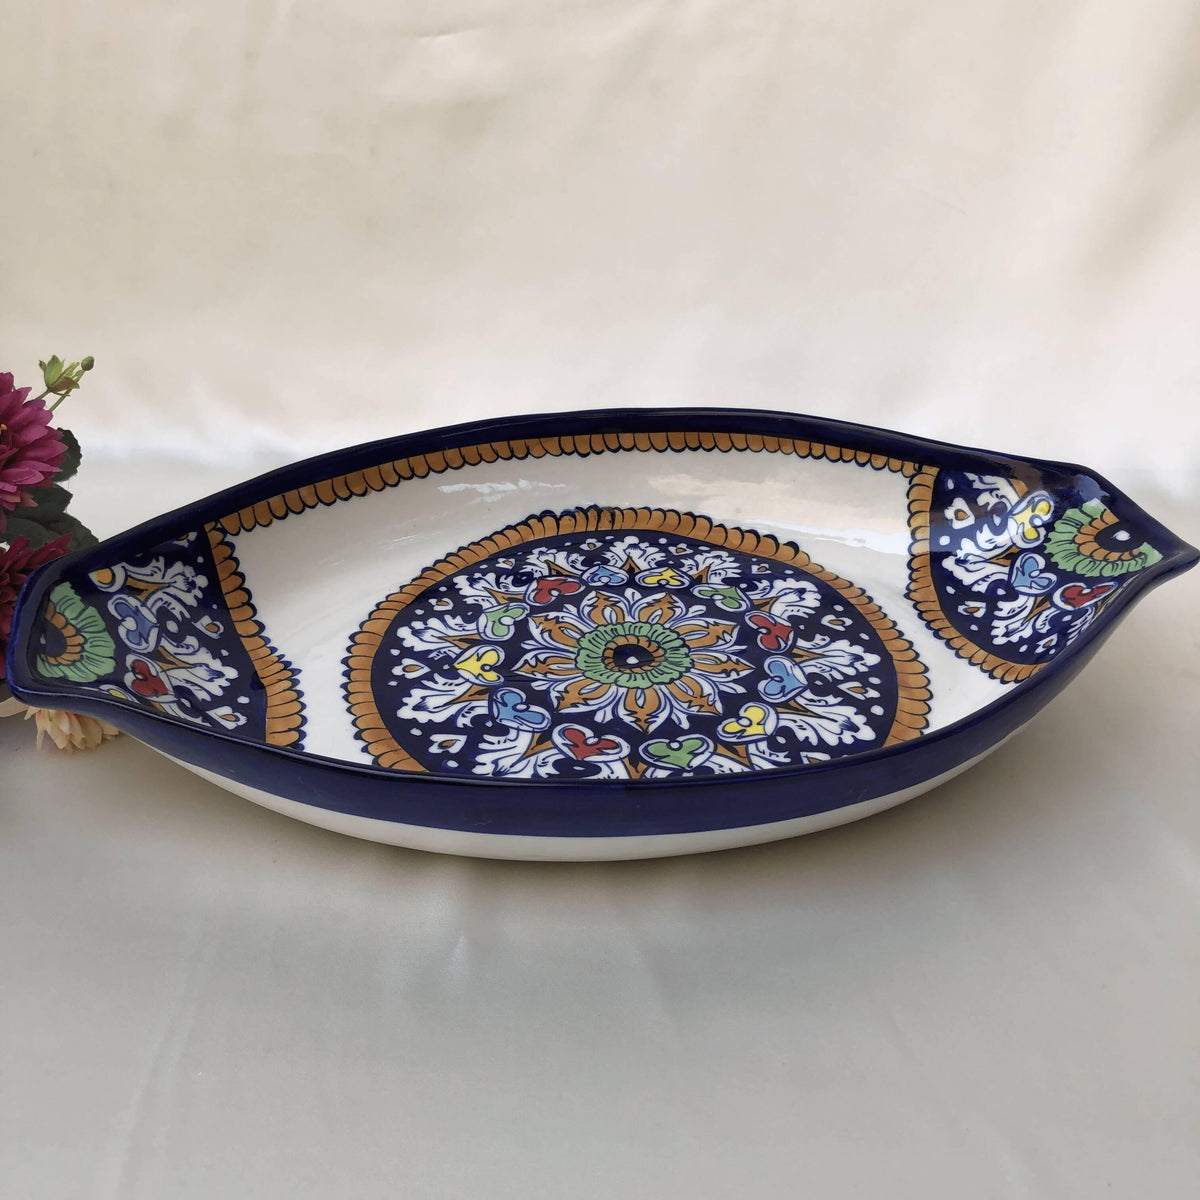 New Tranquility Oval Dish - ValueBox